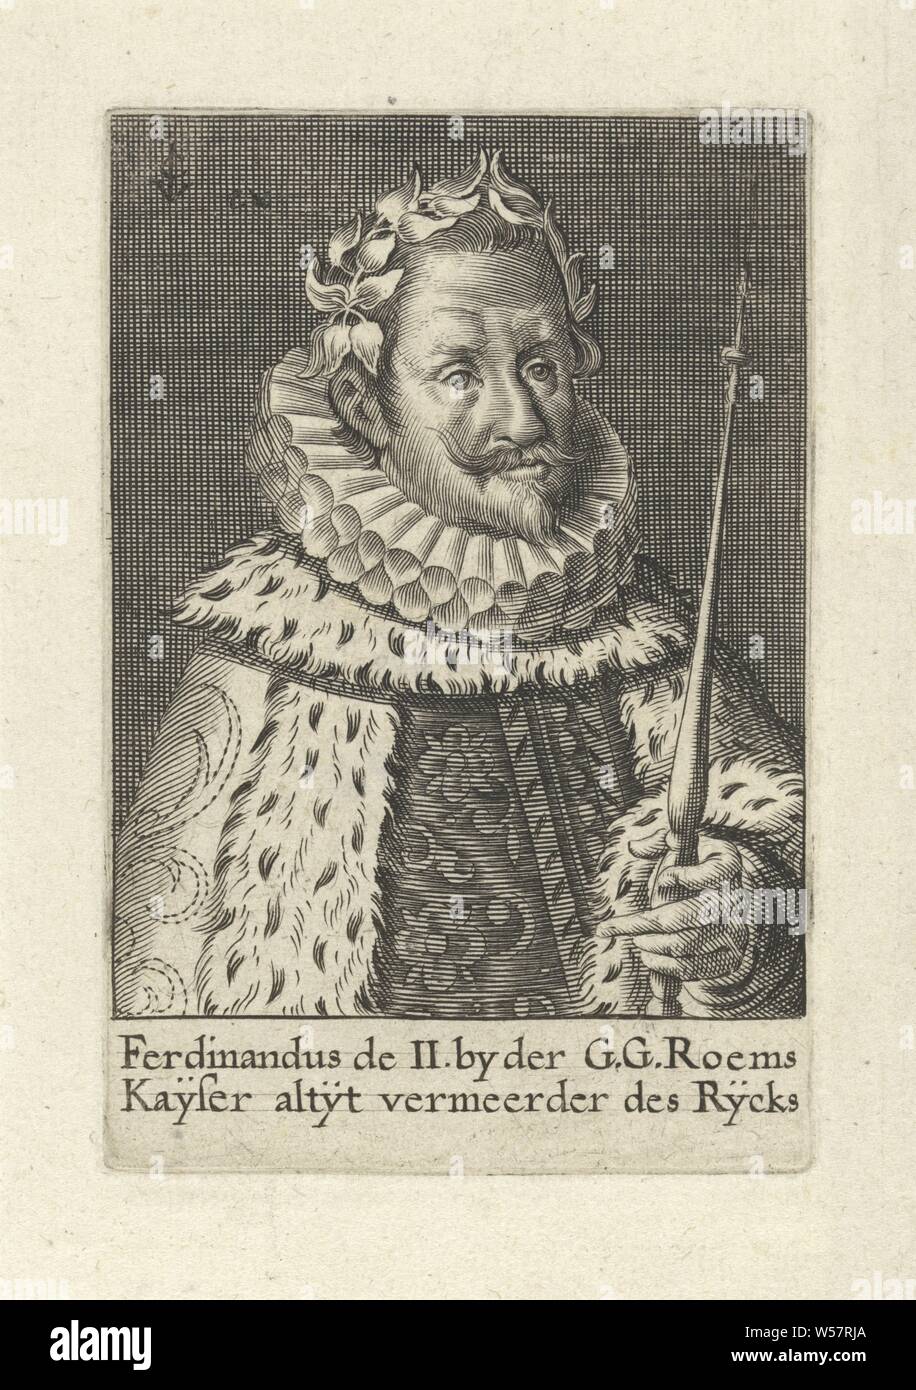 Portrait of Ferdinand II, German emperor, crown (symbol of sovereignty), insignia and symbols of sovereignty (crown, diadem, scepter, orb, seal, standard, cloak, pectoral), Ferdinand II ( German emperor), anonymous, Amsterdam, 1619 - 1652, paper, engraving, h 105 mm × w 69 mm Stock Photo